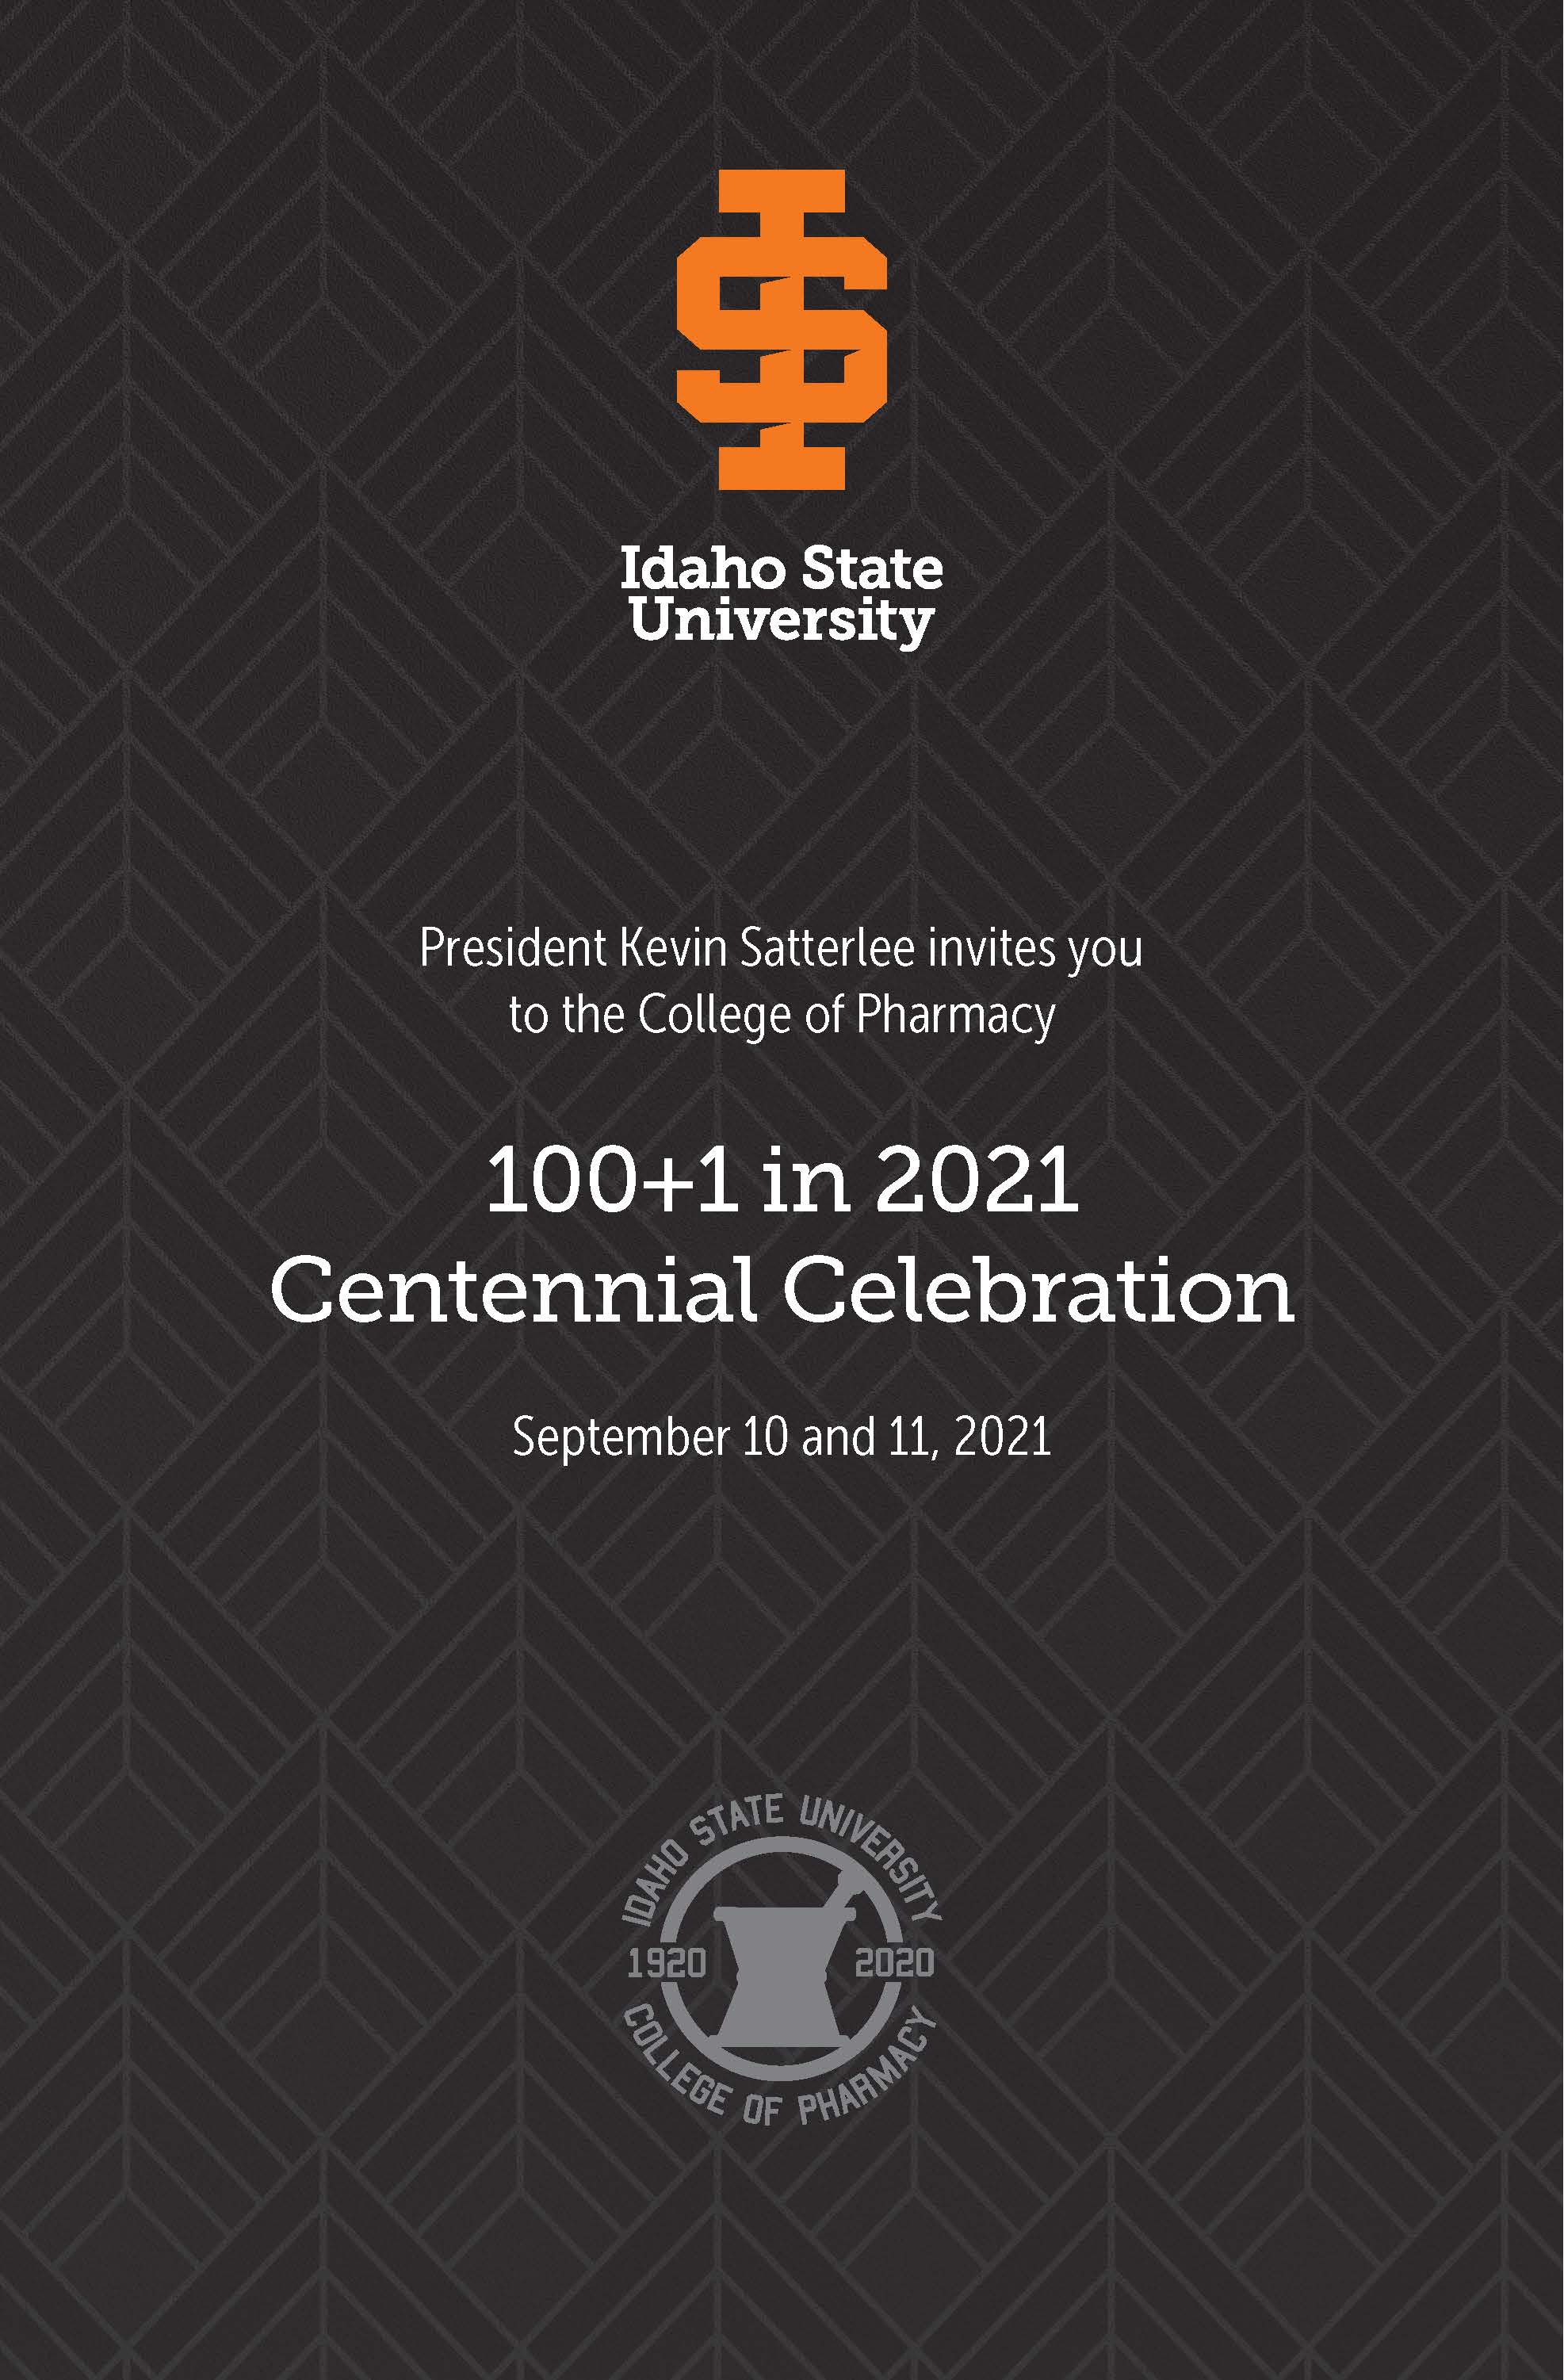 100 + 1 in 2021 - President Kevin Satterlee invites you to the Idaho State University College of Pharmacy Centennial Celebration, September 10 & 11, 2021